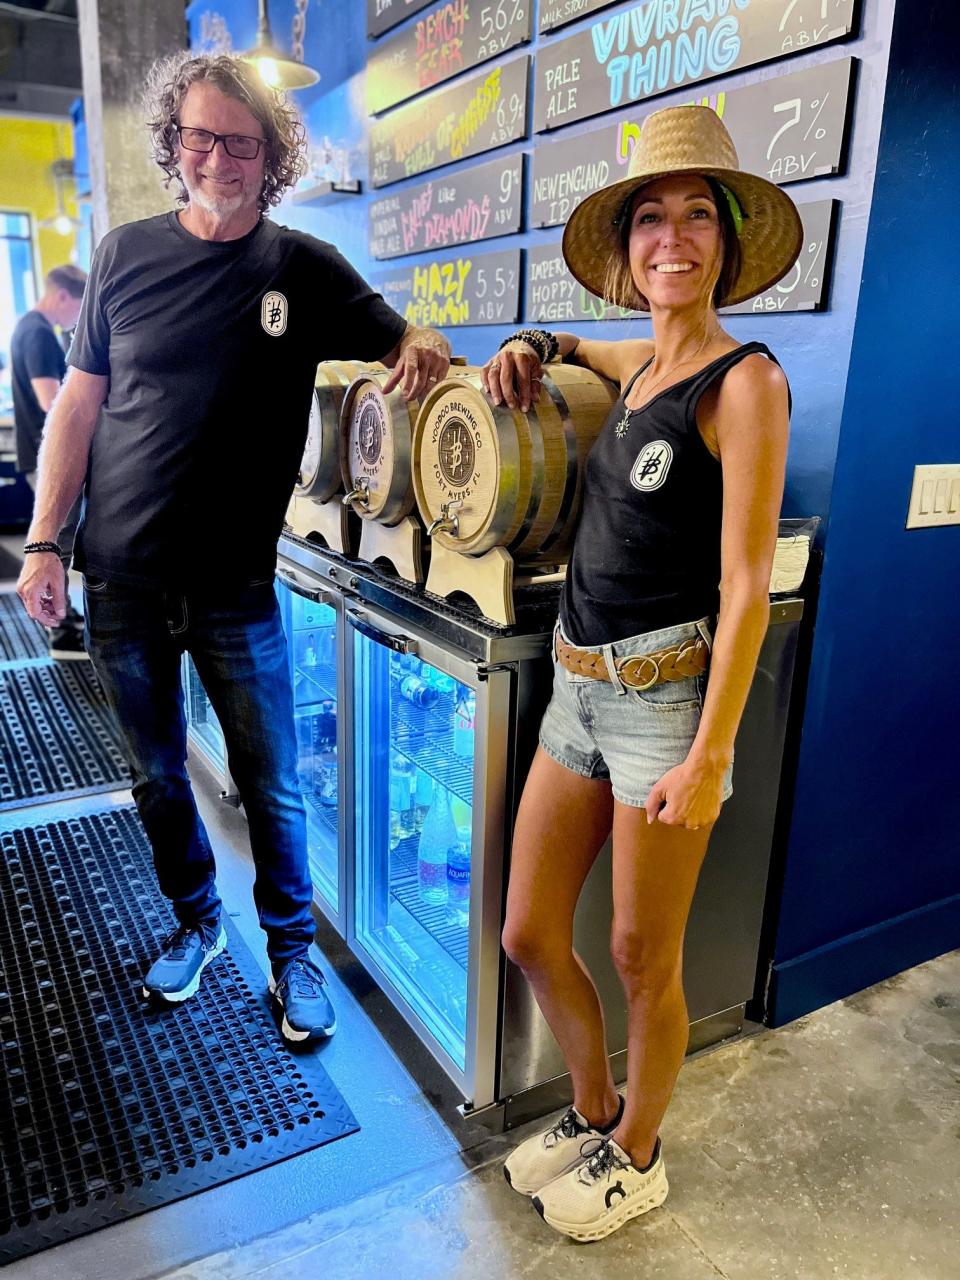 Keith and Mashelle Towles are the owners of Voodoo Brewing Co. in downtown Fort Myers.